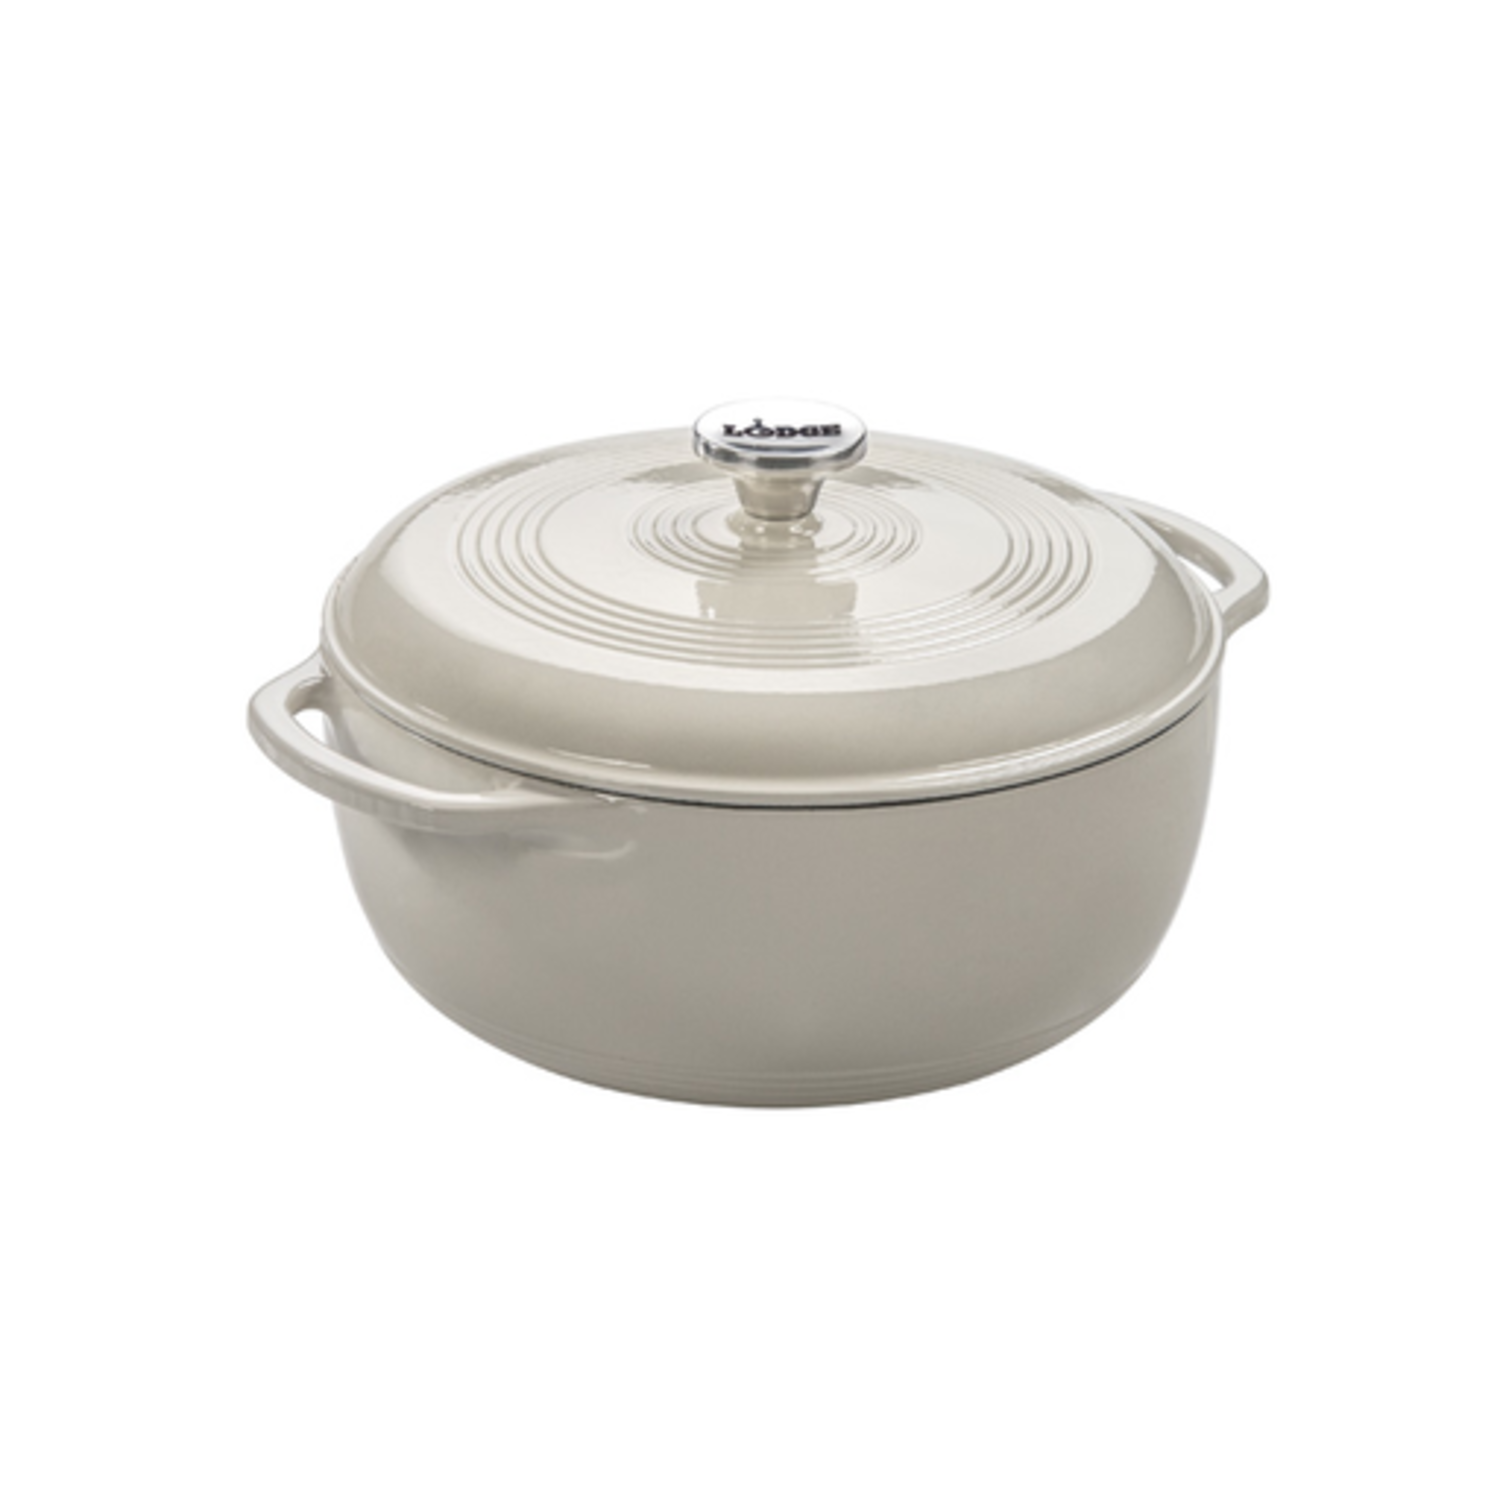 Lodge Red 6-Qt. Dutch Oven  Dutch oven, Lodge cookware, Oven